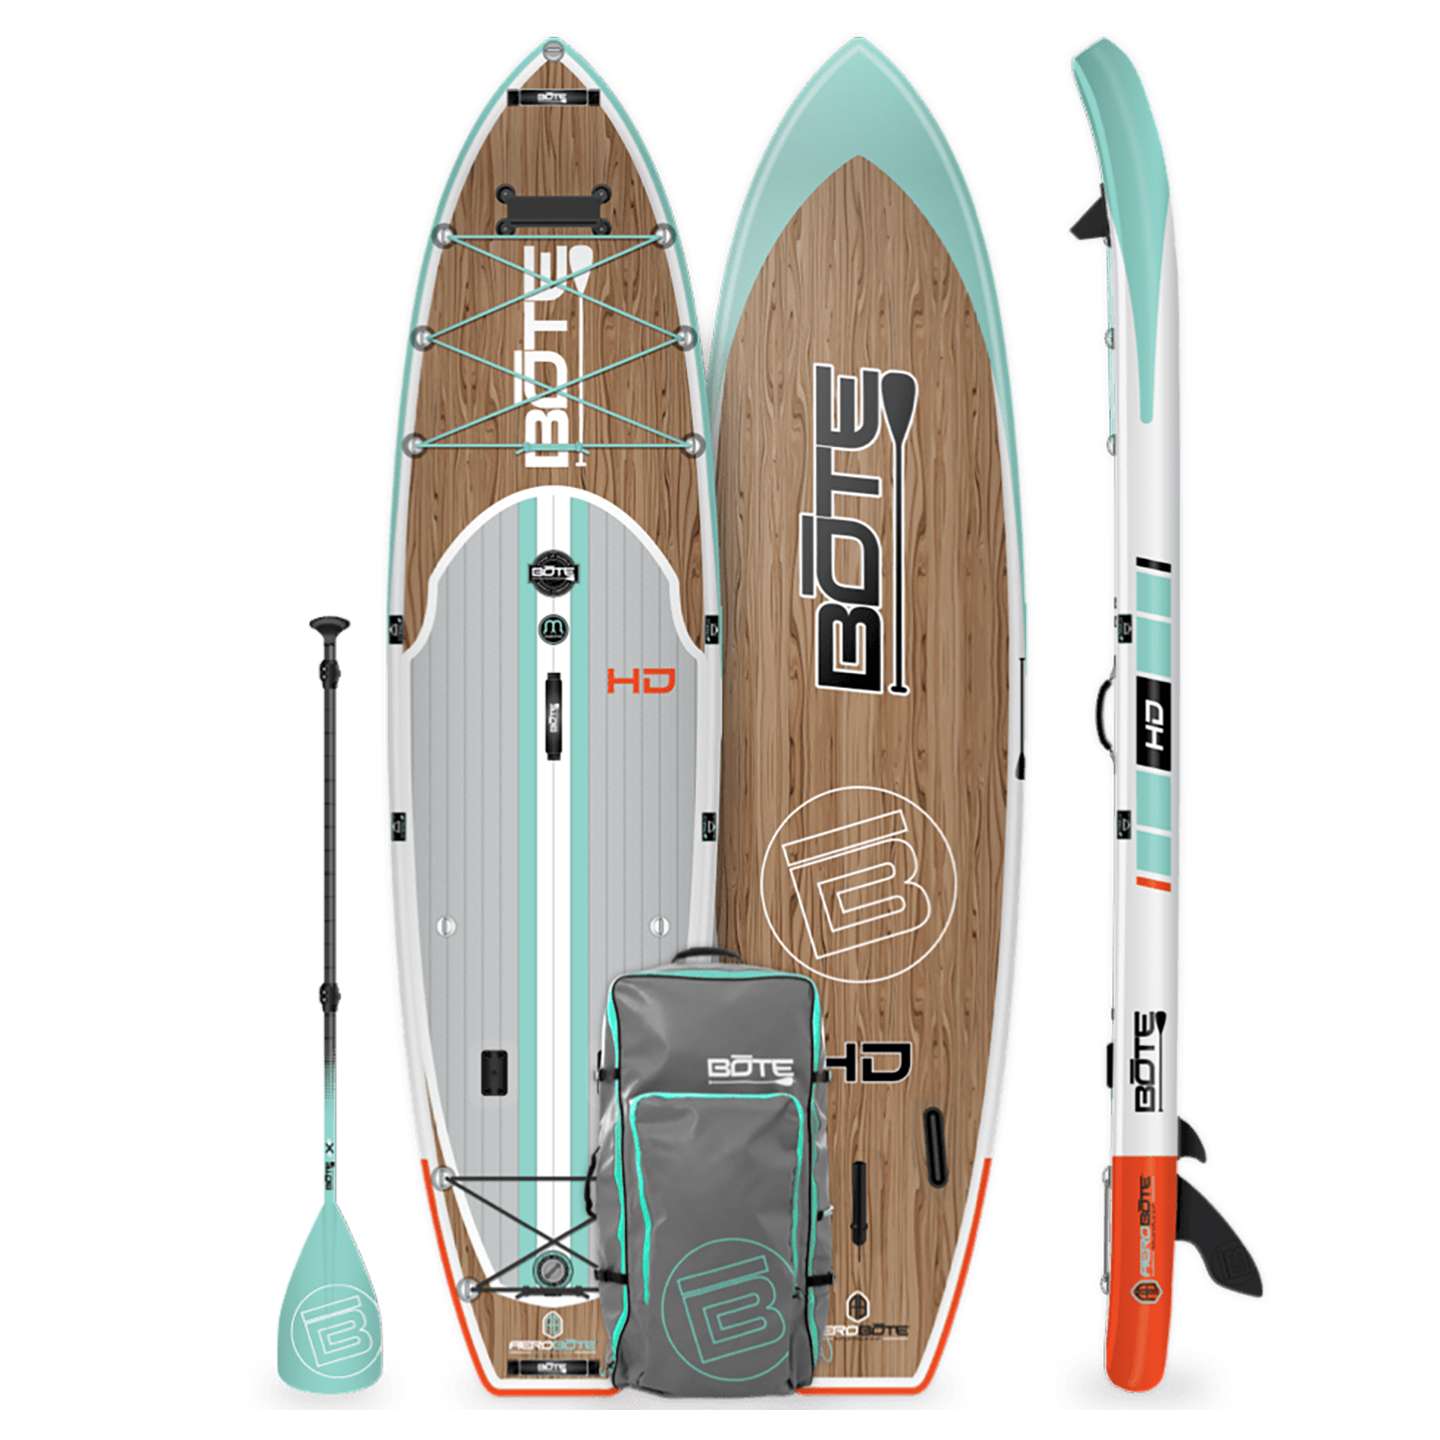 Bote HD Aero 11′6 Inflatable SUP | King of Watersports